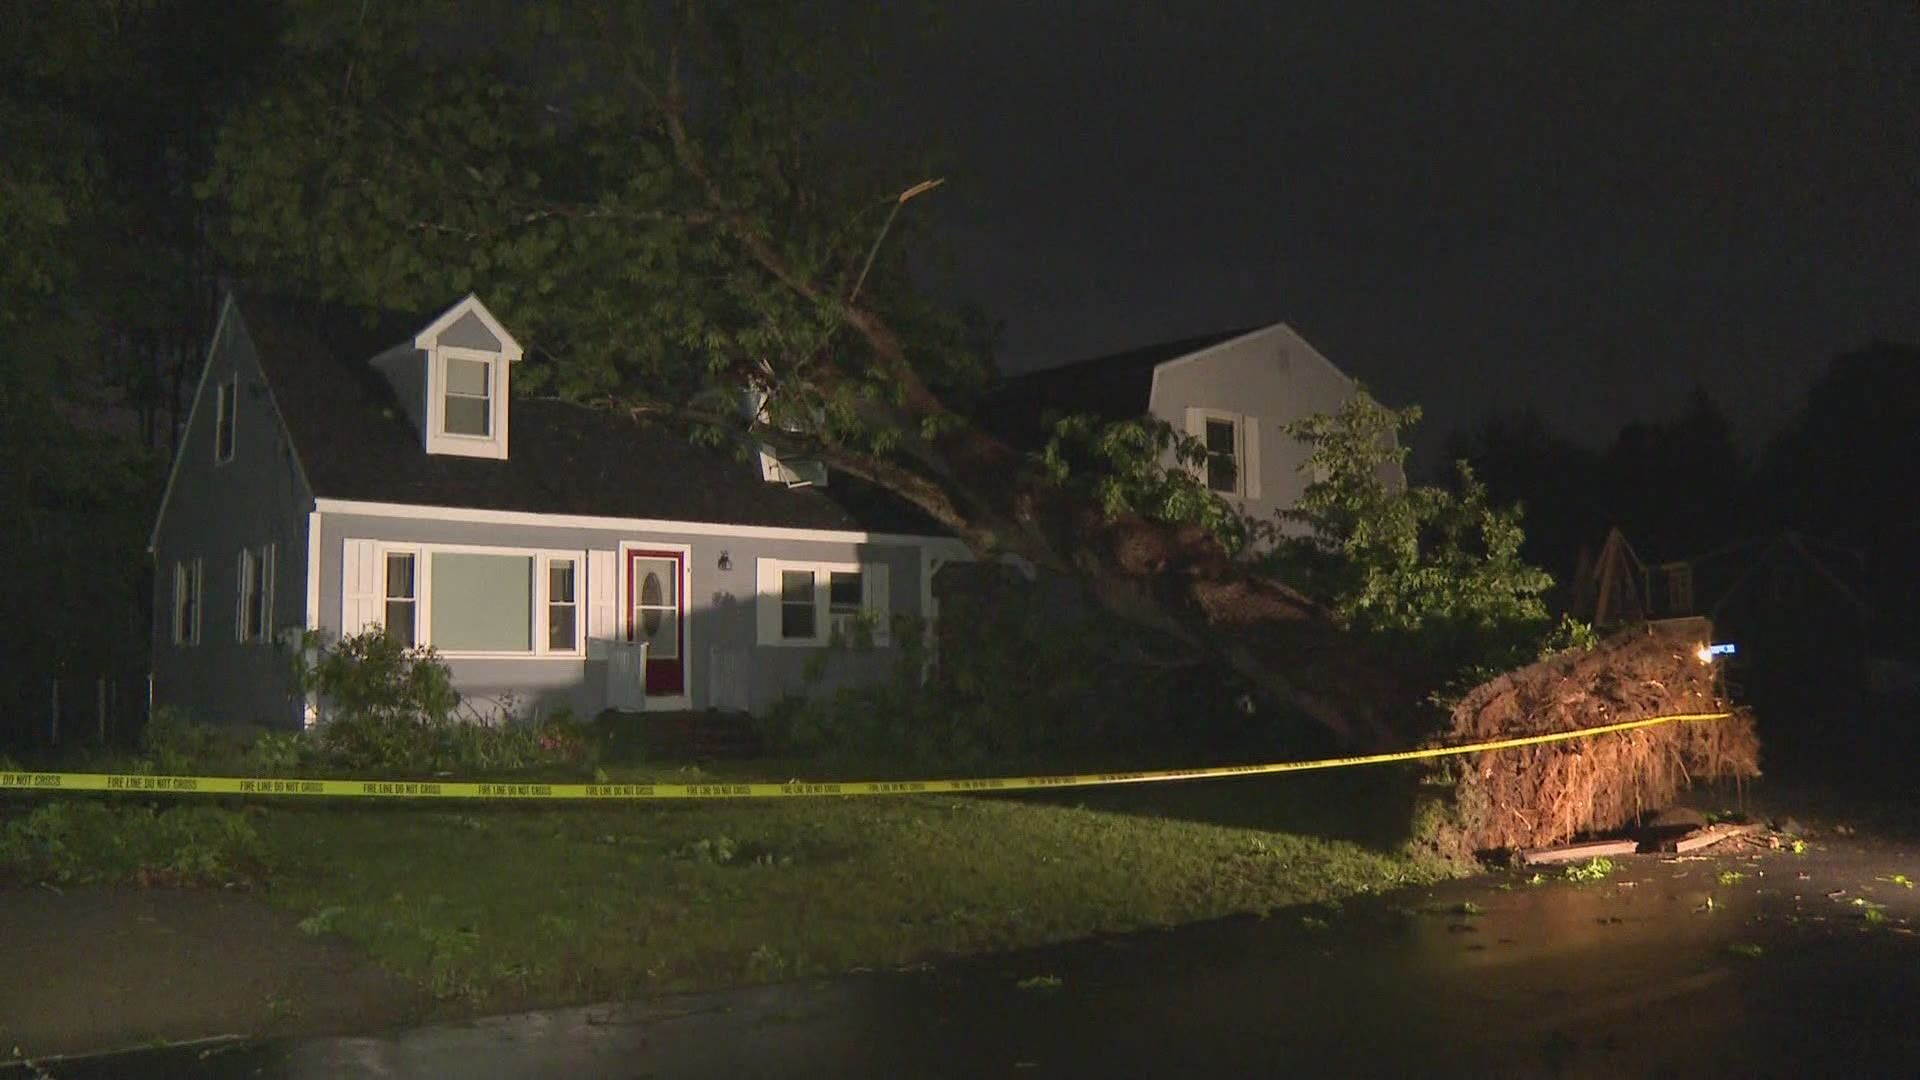 A tree went crashing through a house in Gorham, luckily no one was hurt.